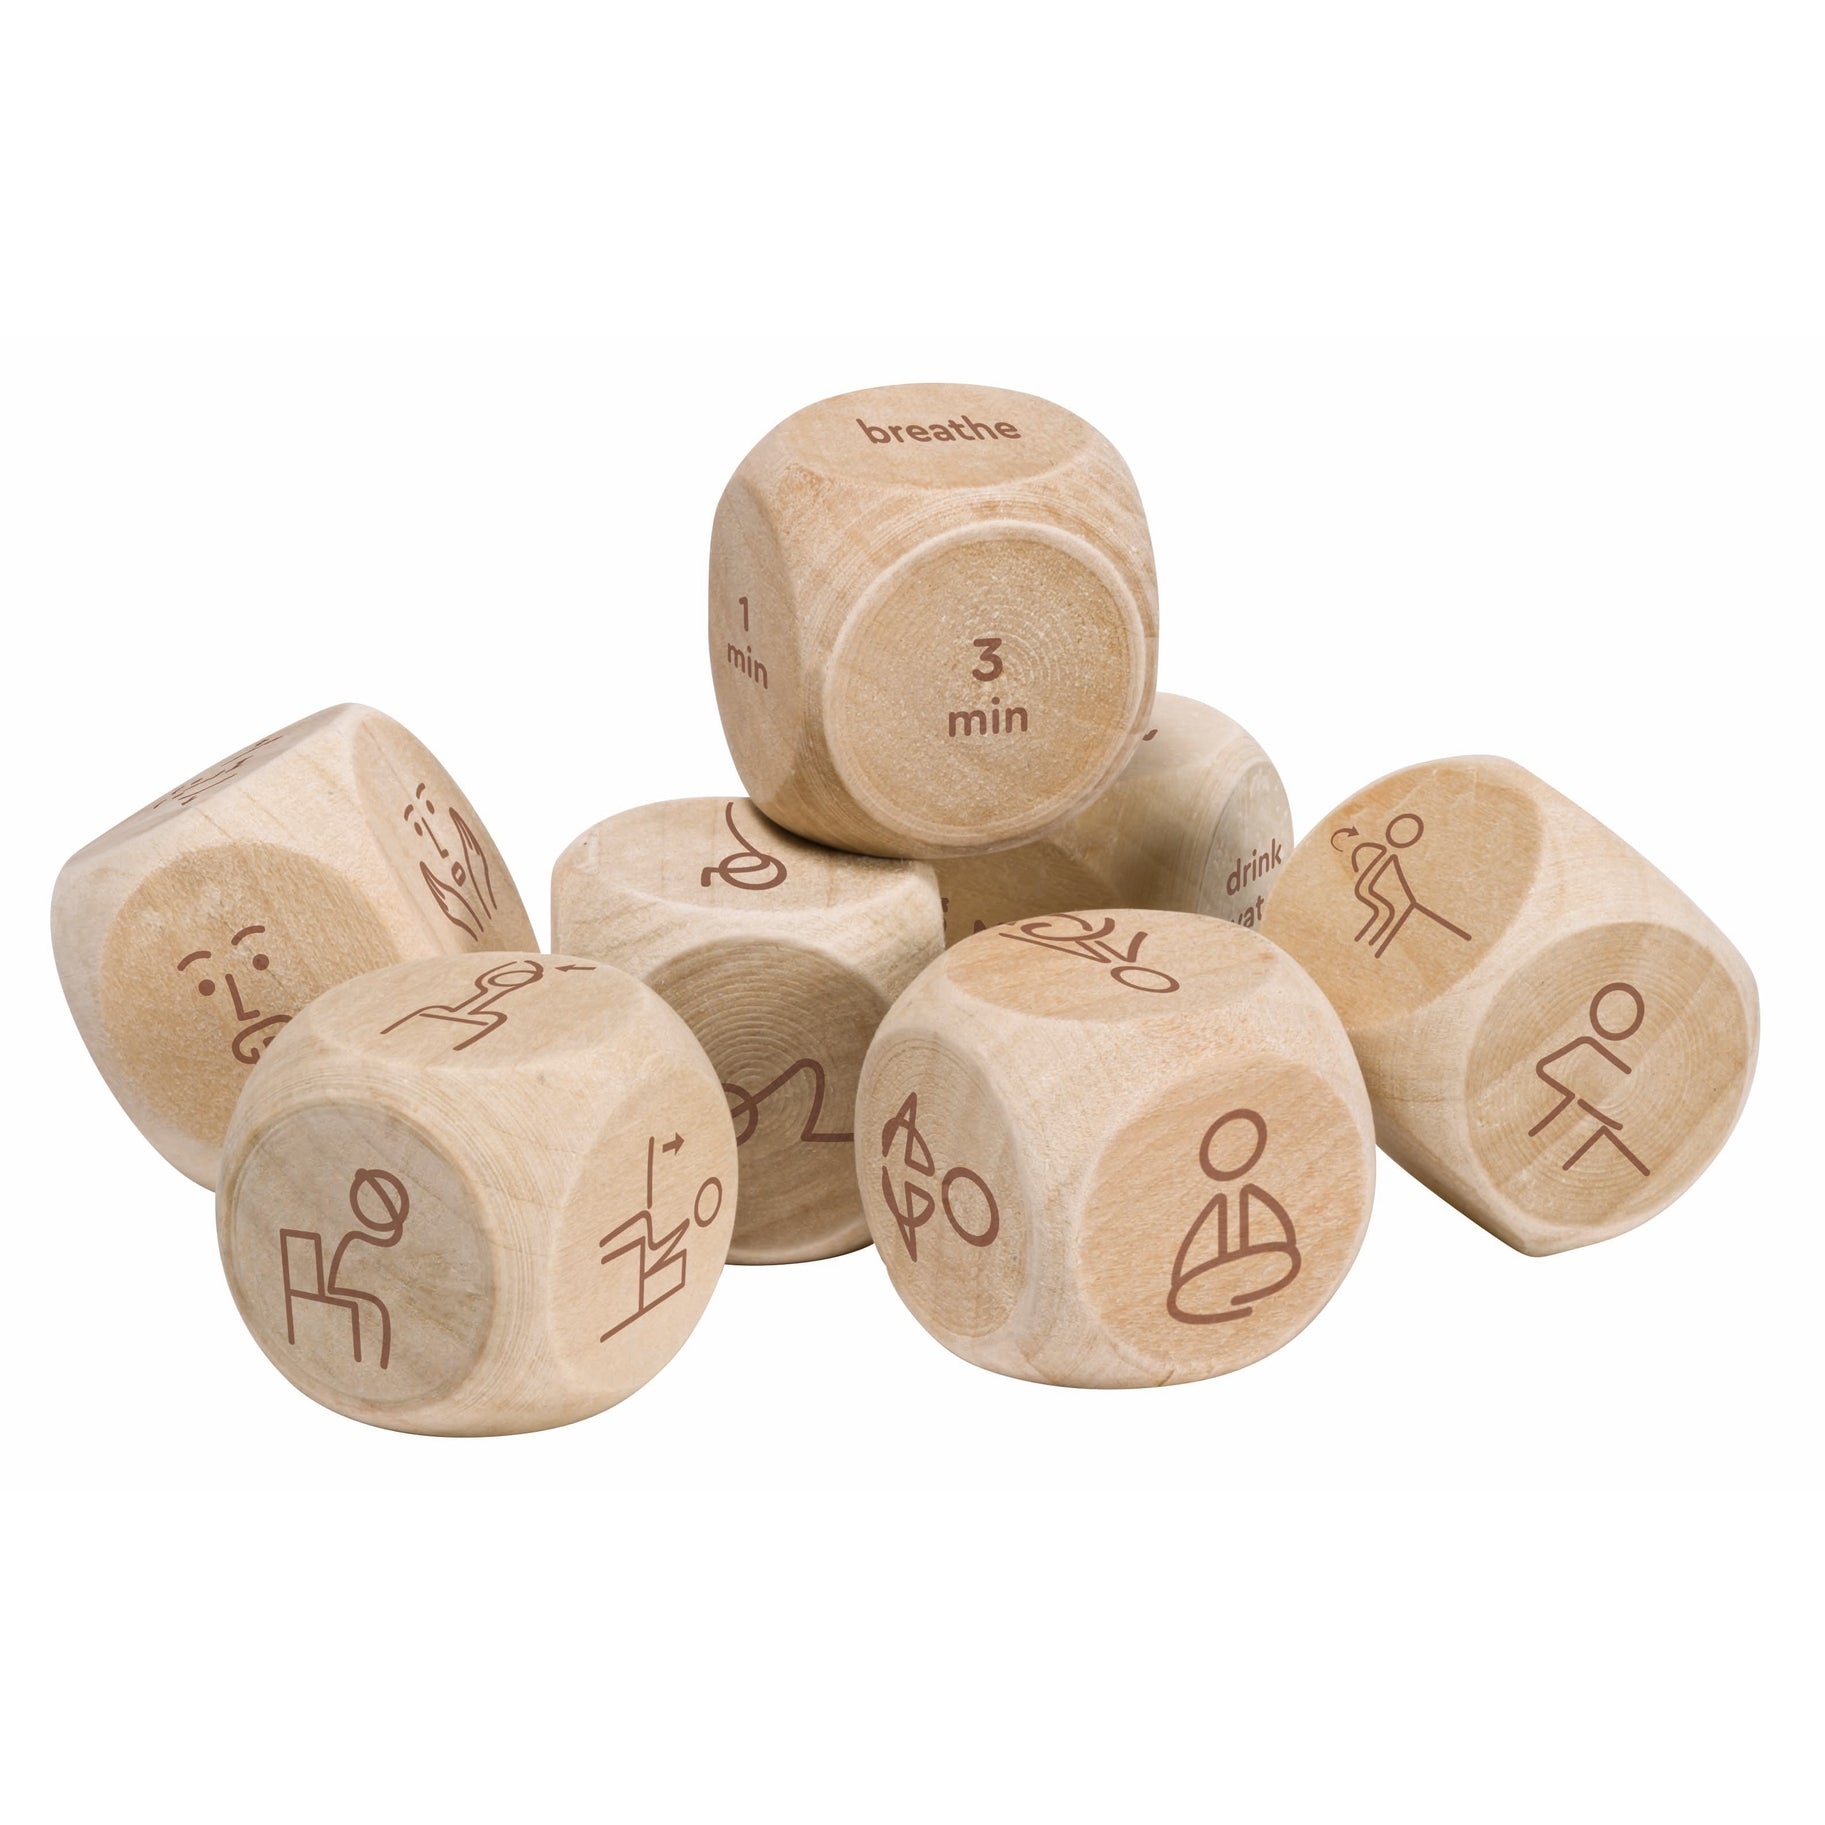 Hi There! Strike A Pose Yoga Dice – Illinois State Museum - the Shop